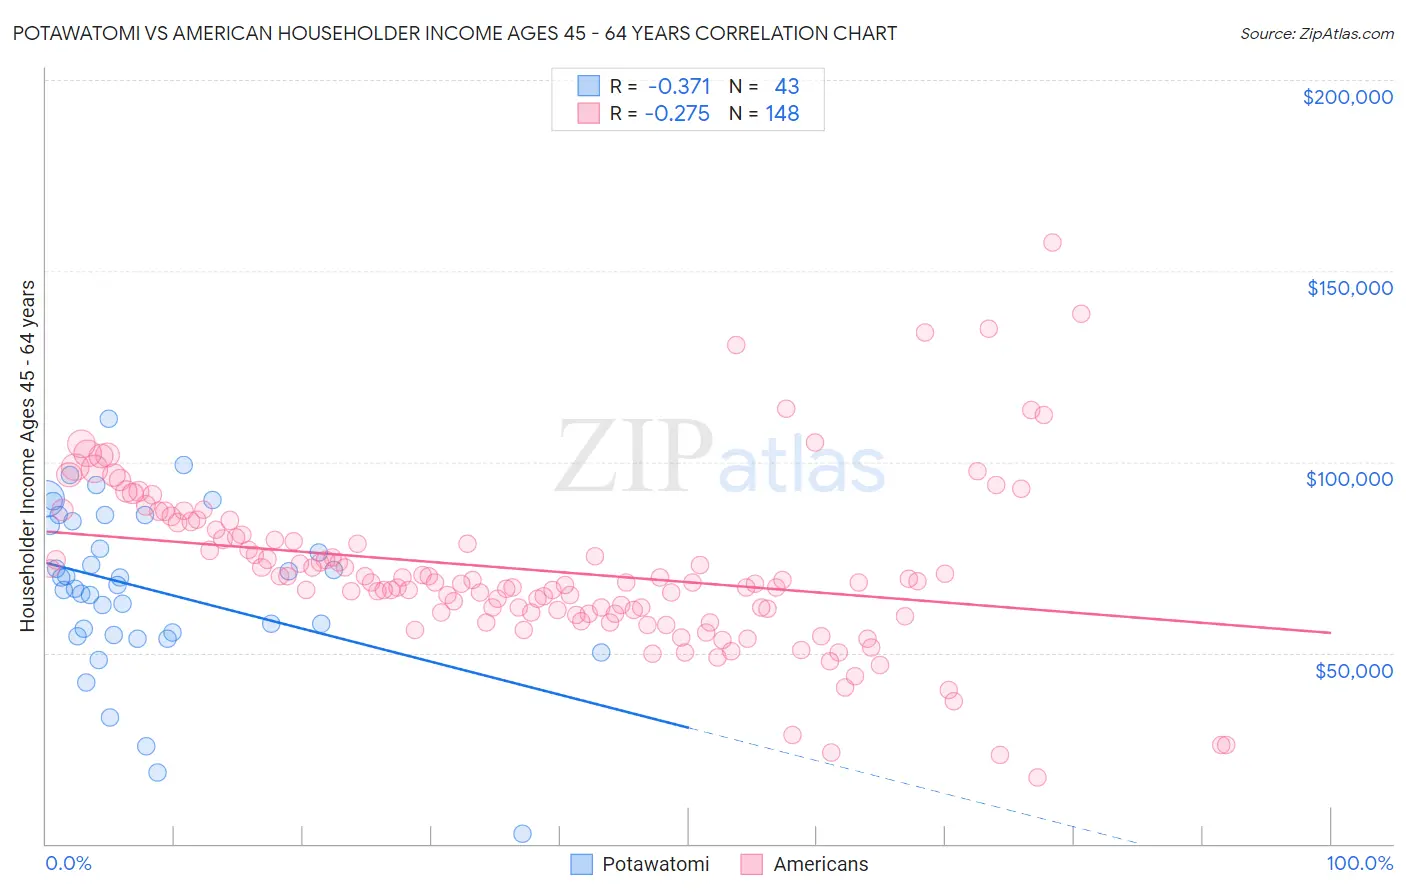 Potawatomi vs American Householder Income Ages 45 - 64 years